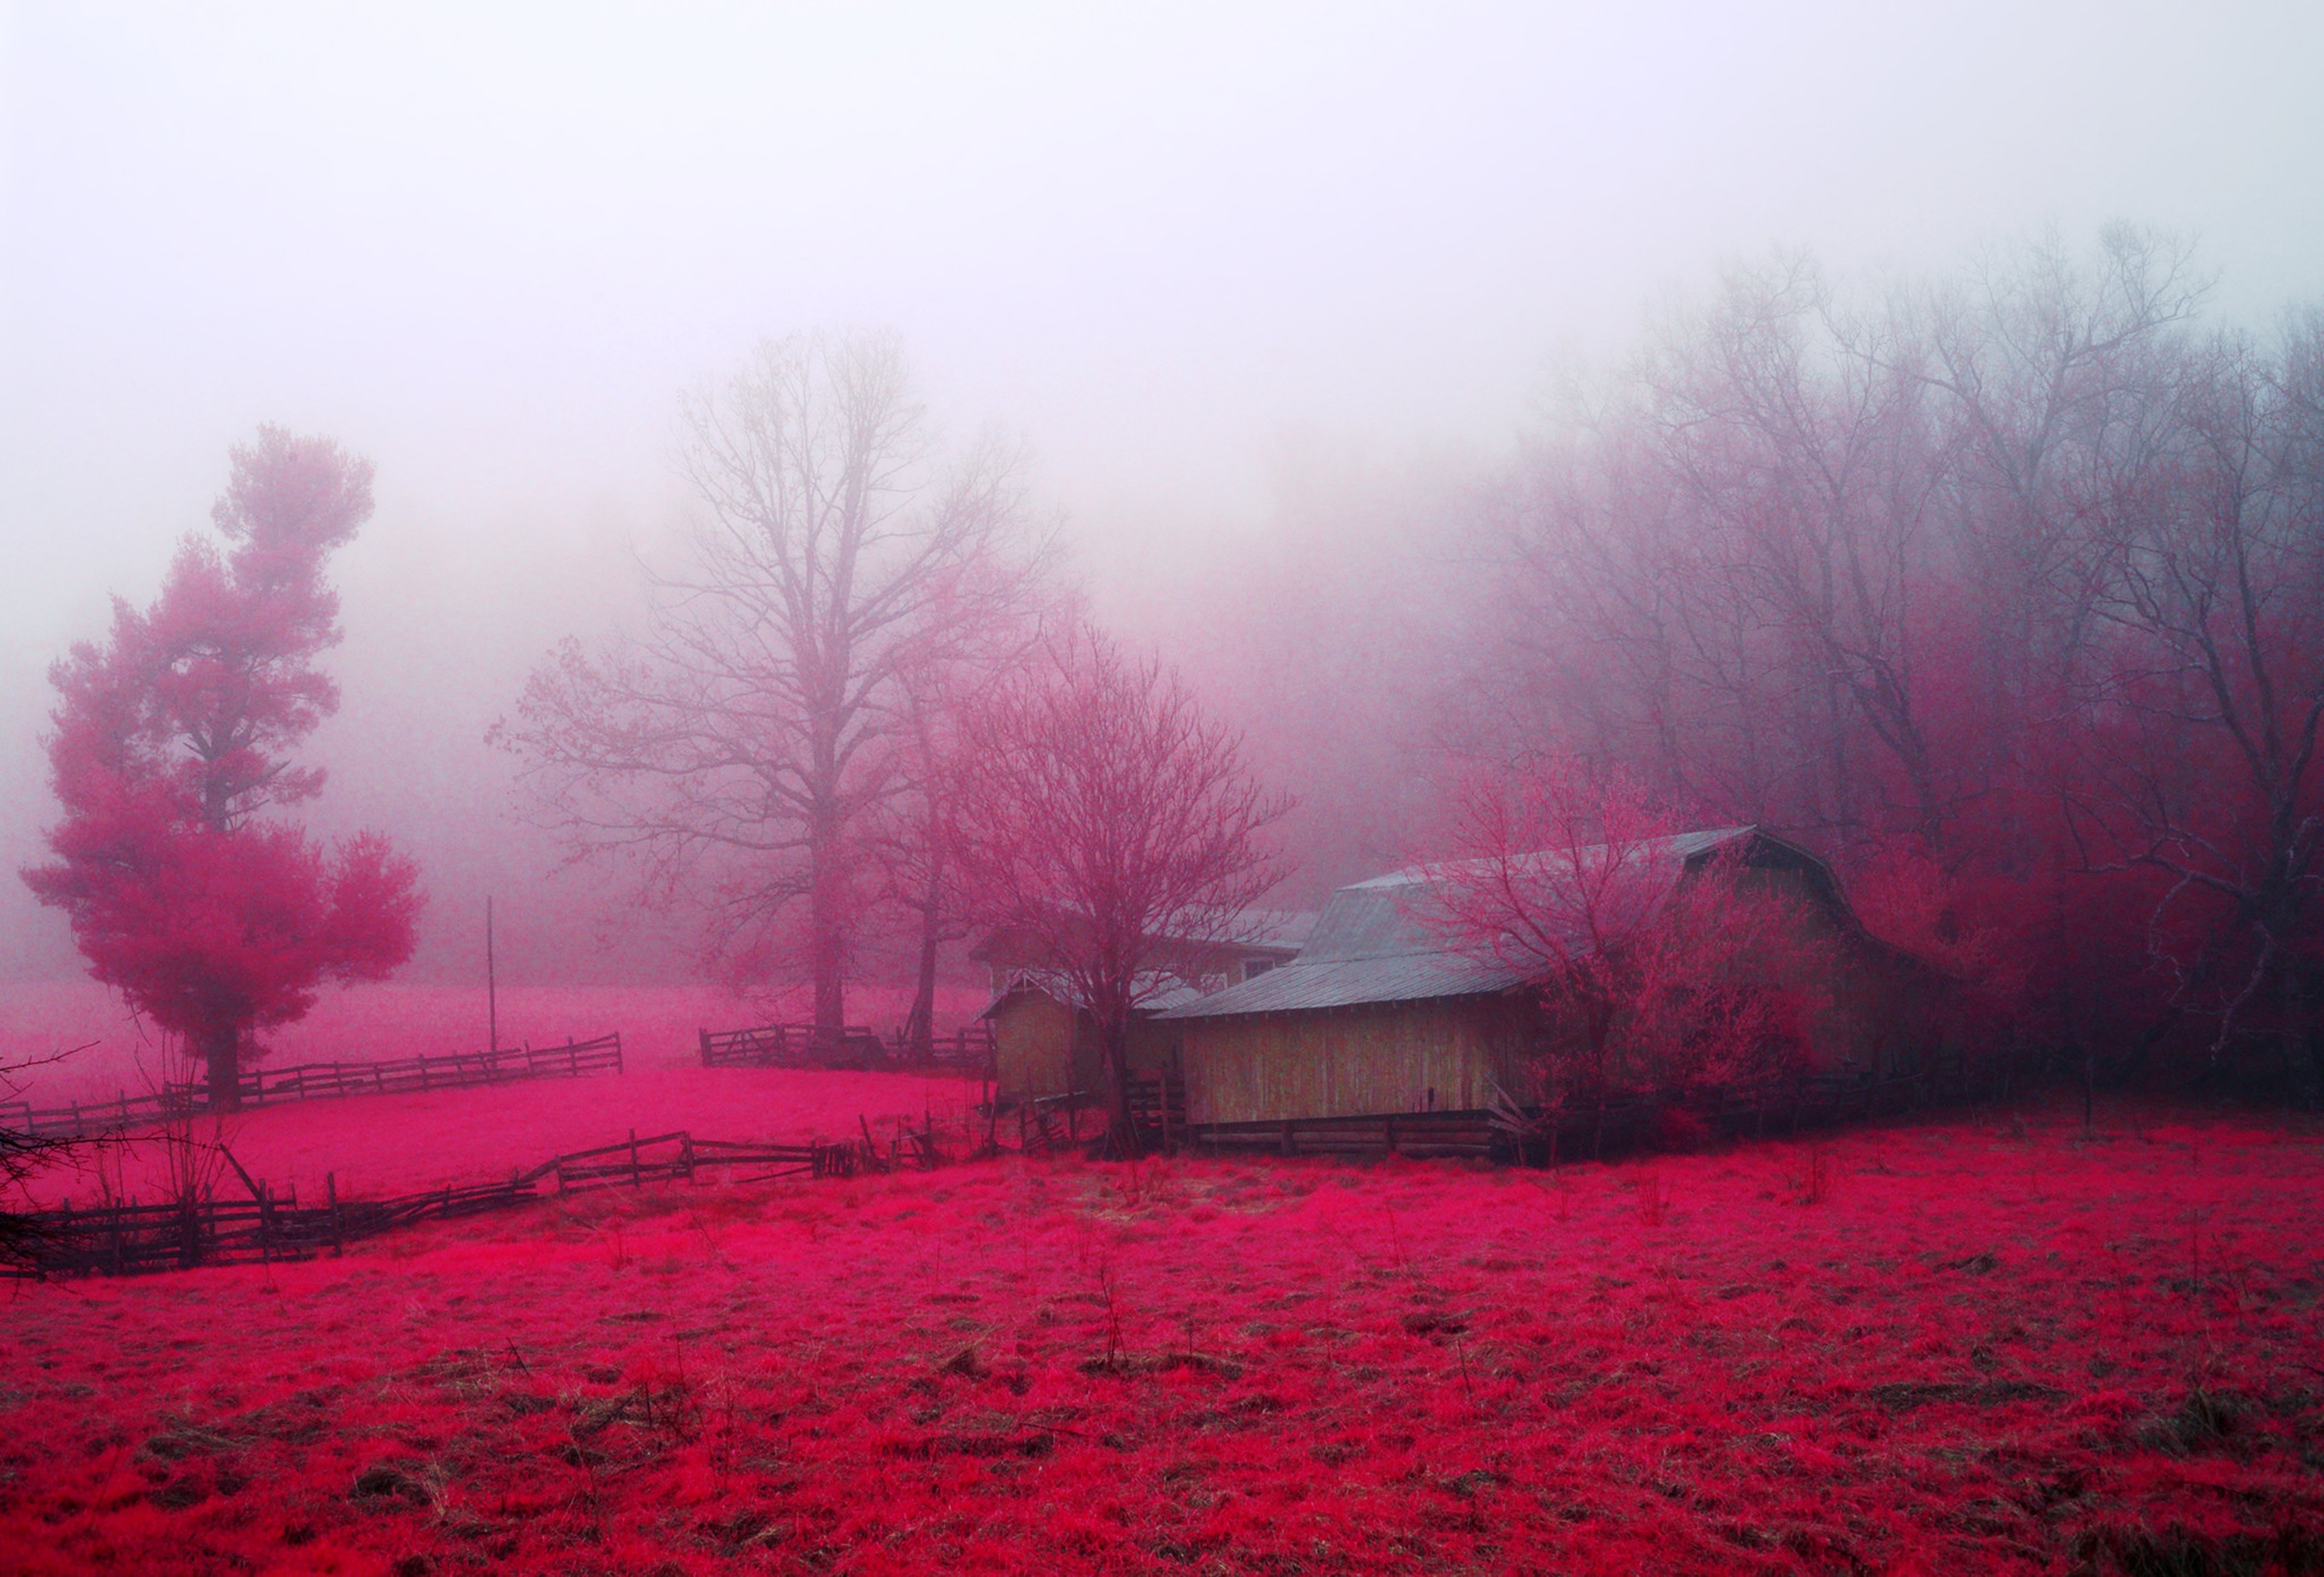 nature, House, Huts, Trees, Earth, Farms, Countryside, Autumn, Red, Pink, Rose, Beauty, Landscapes Wallpaper